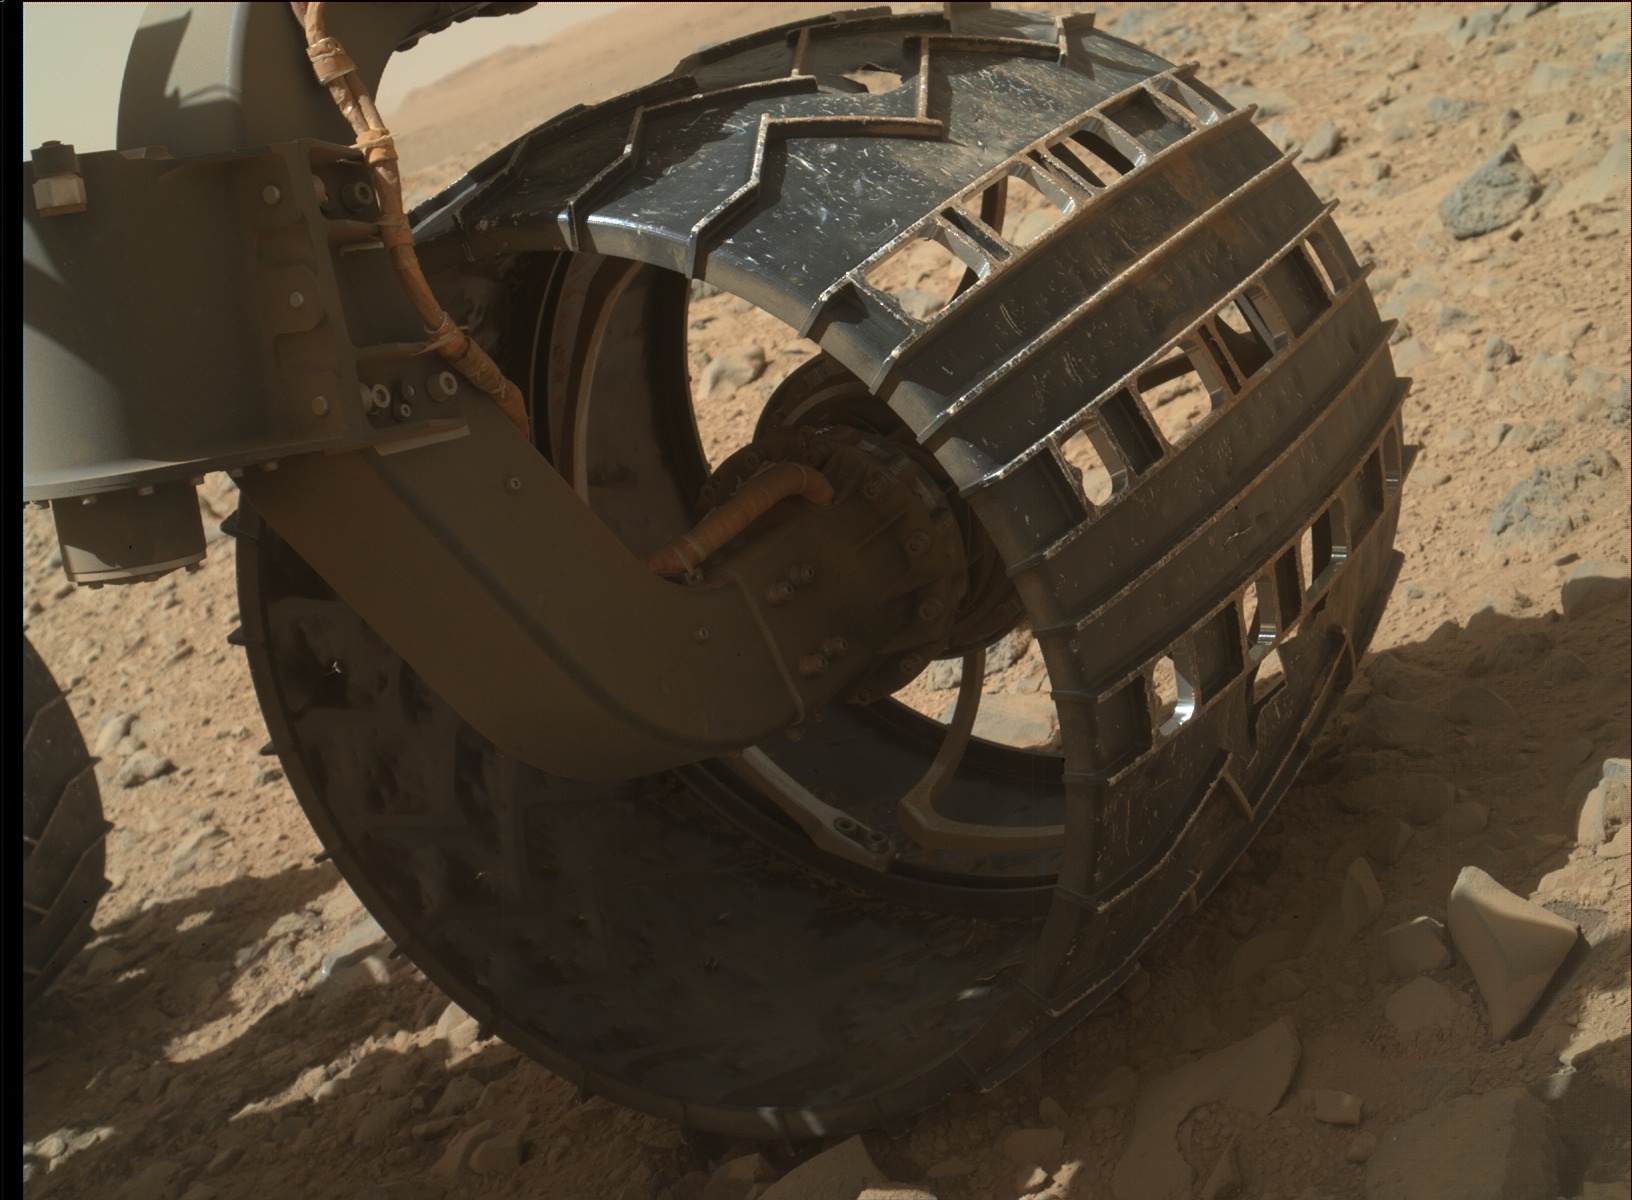 Nasa's Mars rover Curiosity acquired this image using its Mars Hand Lens Imager (MAHLI) on Sol 504